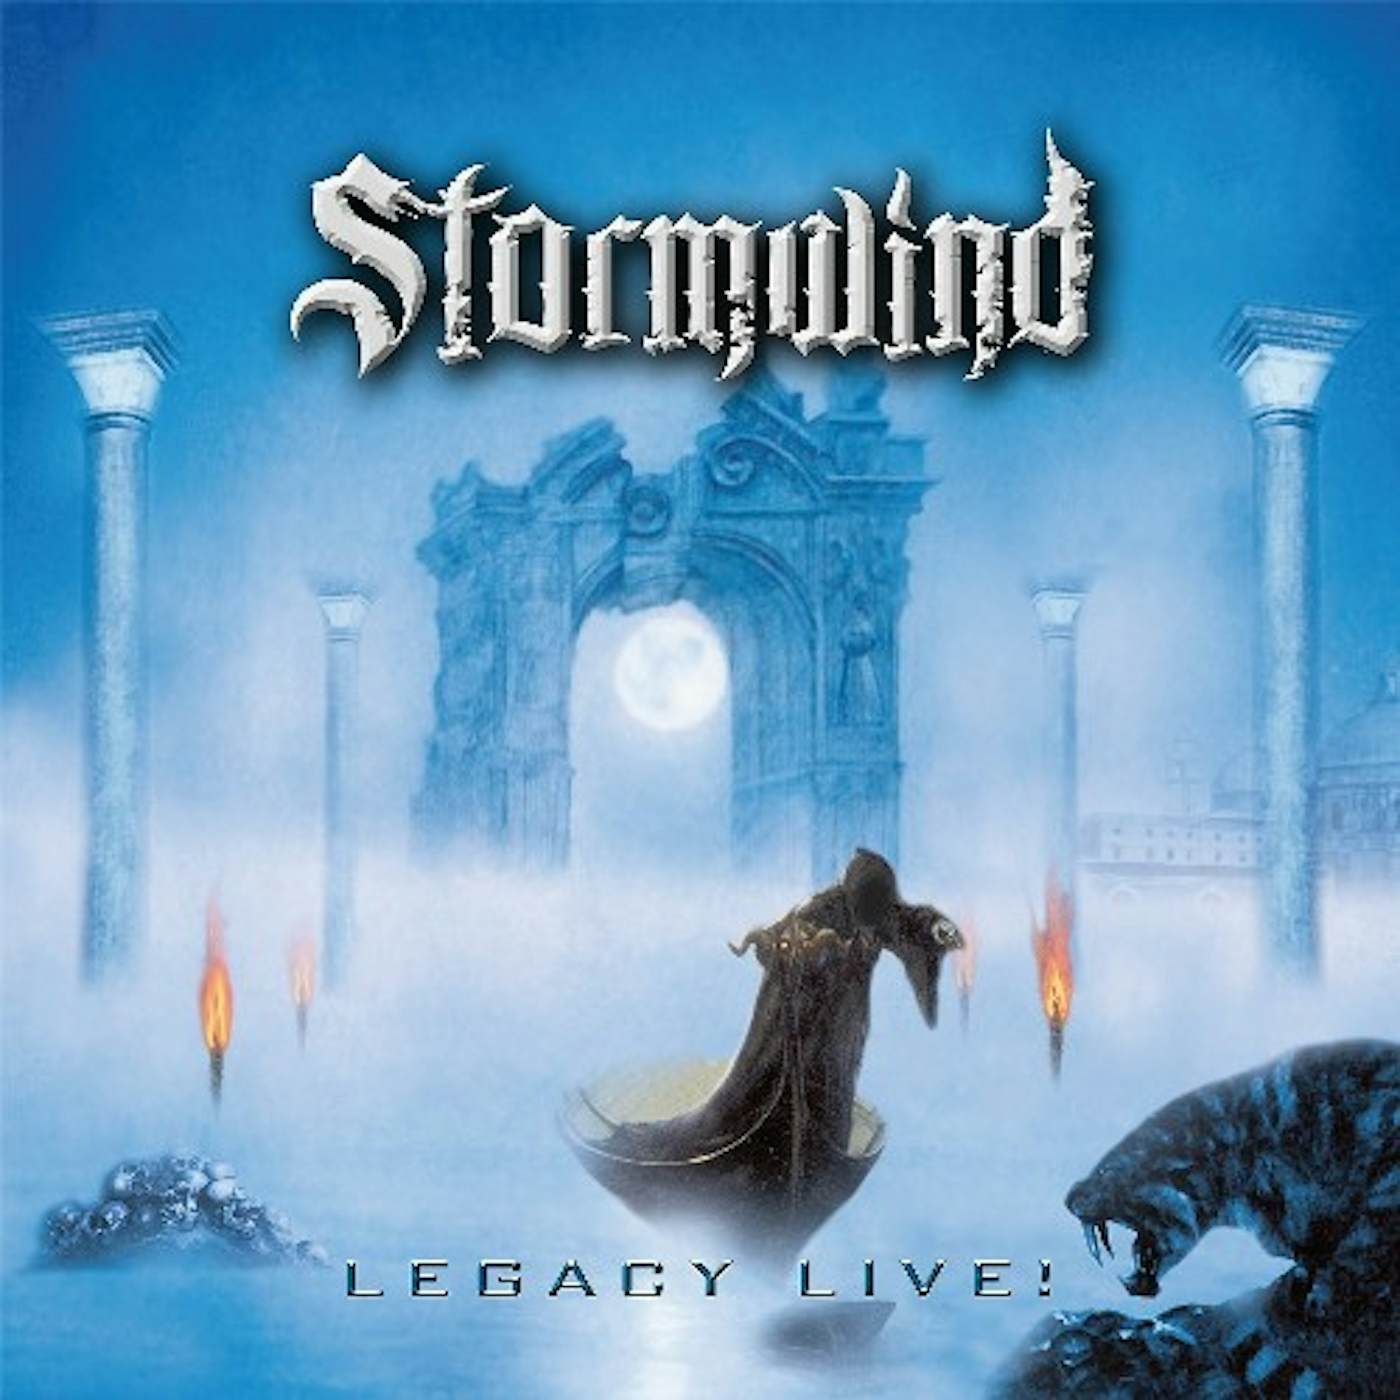 Stormwind LEGACY LIVE (RE-MASTERED) Vinyl Record